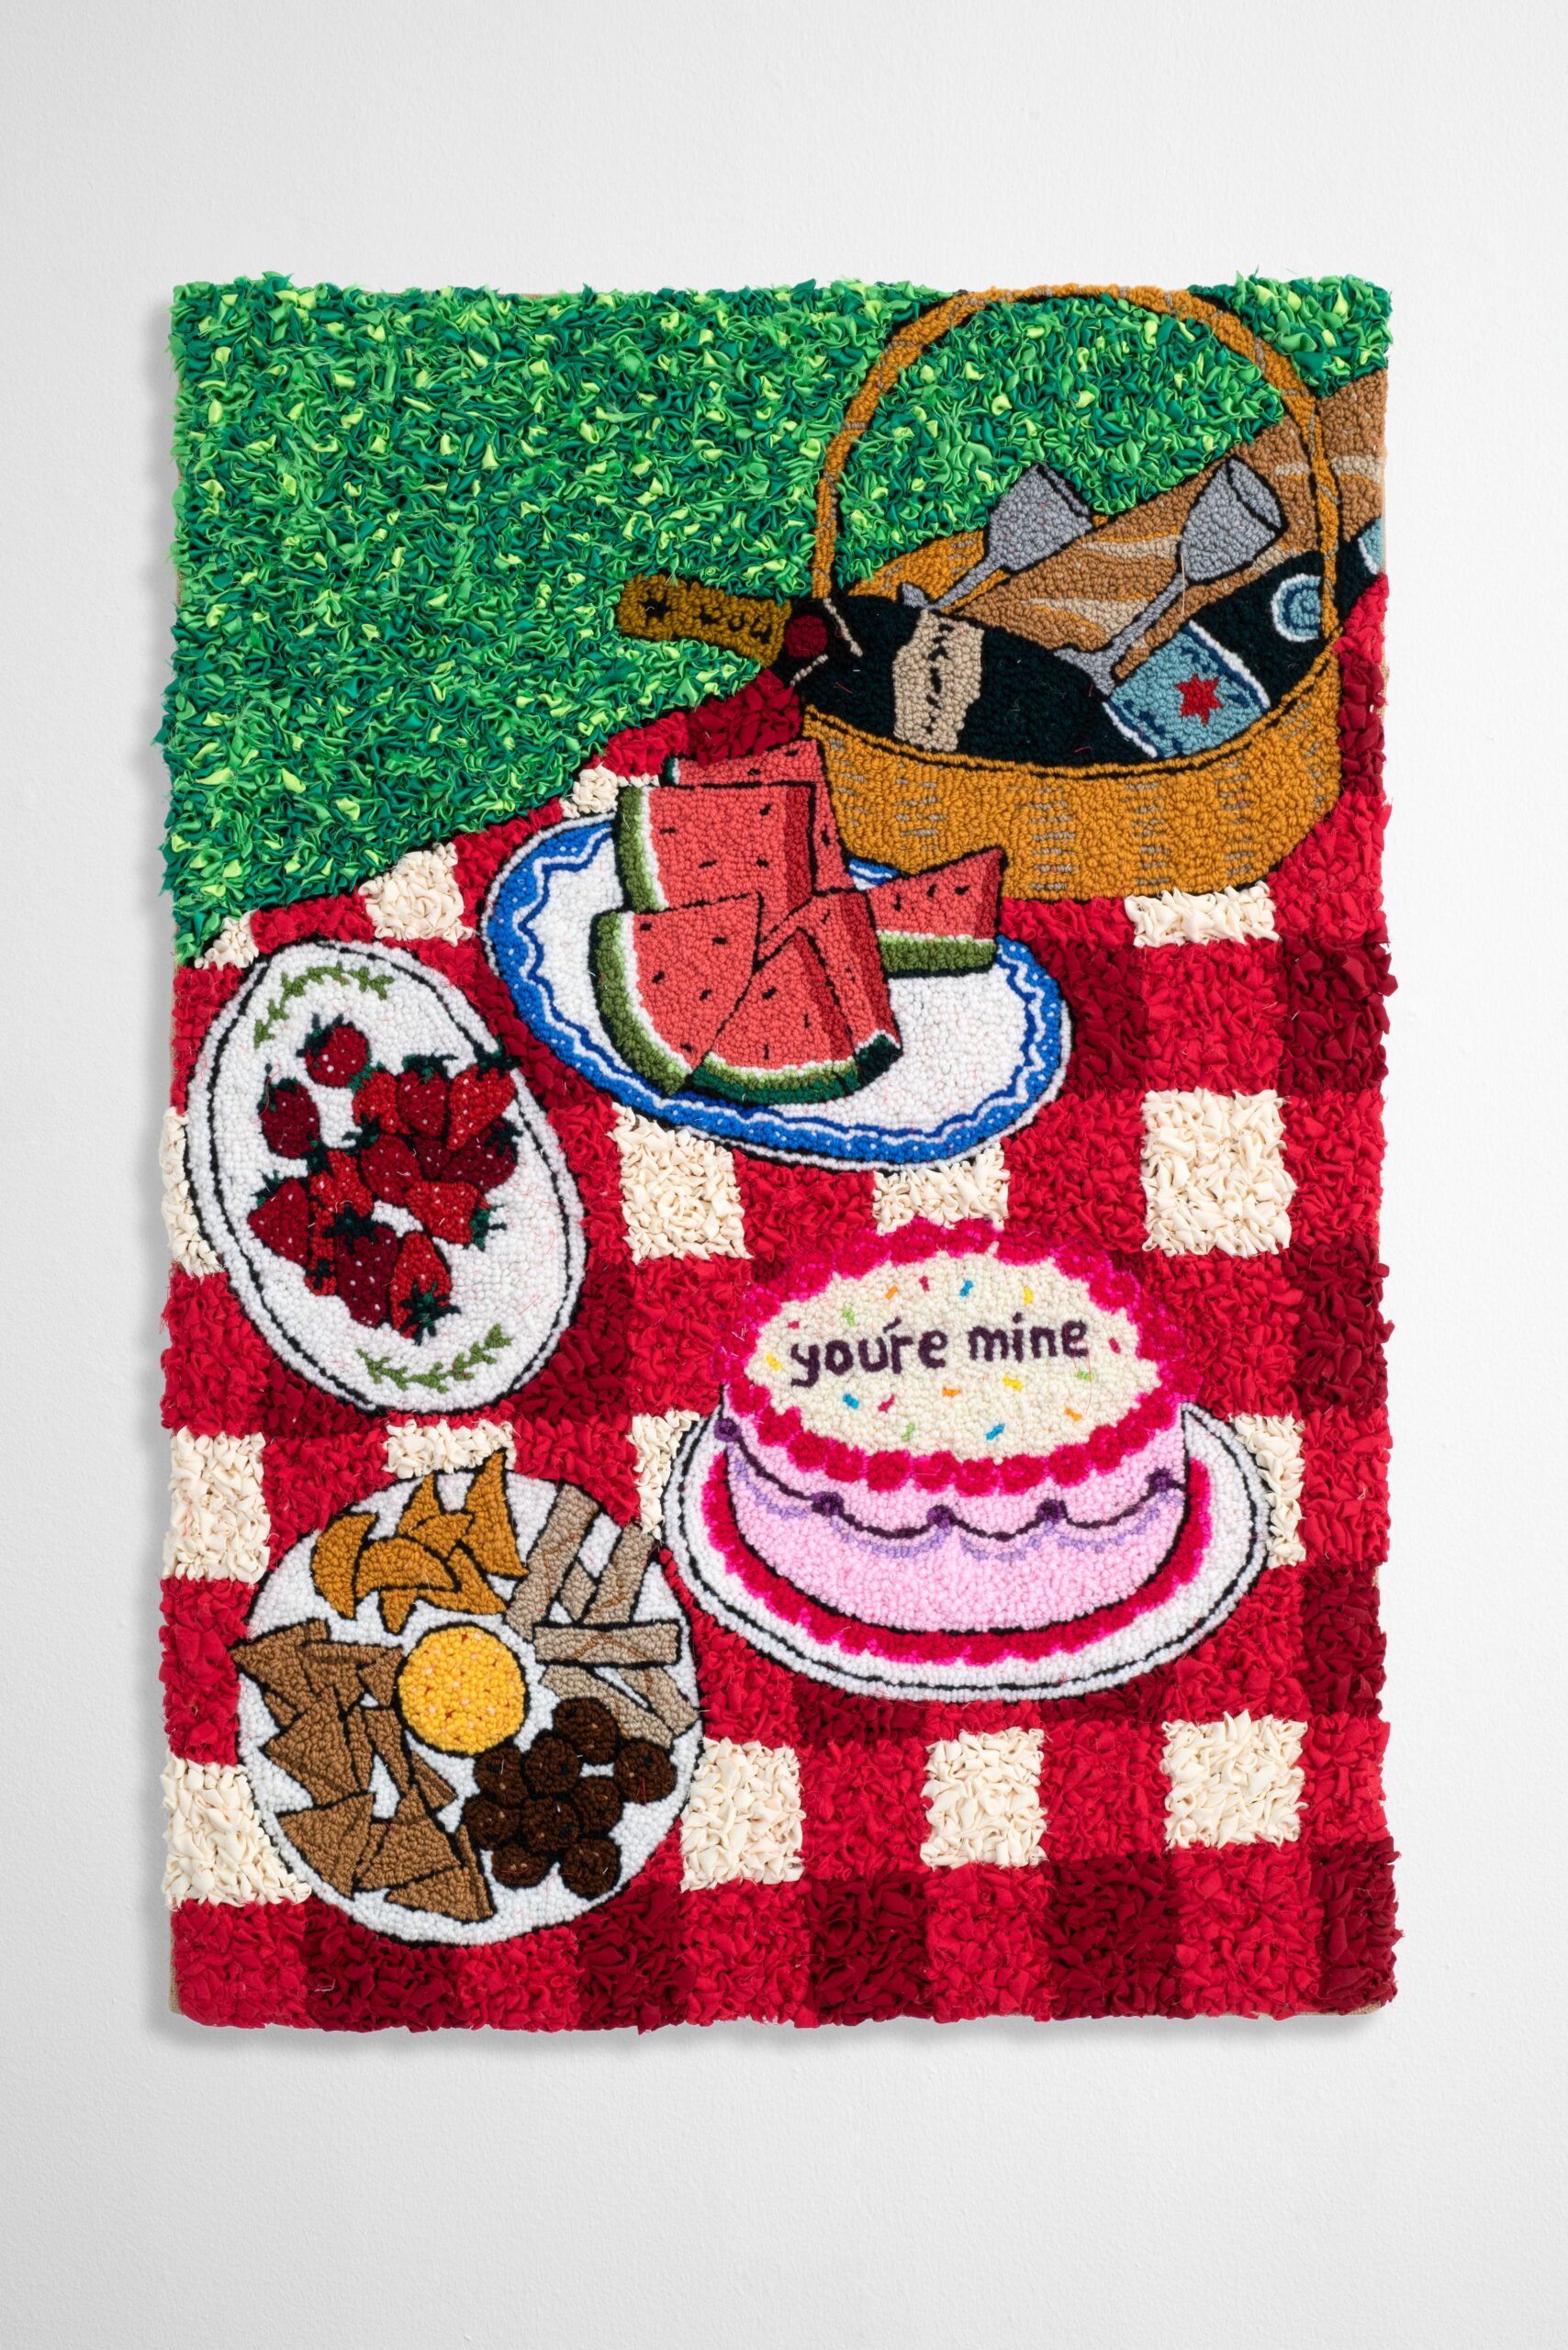 Talia Ramkilawan. I’d spend everyday with you/ if it’s enough to make you mine, 2022. Wool and cloth on hessian. 89 x 61 x 4 cm (Courtesy of WHATIFTHEWORLD)